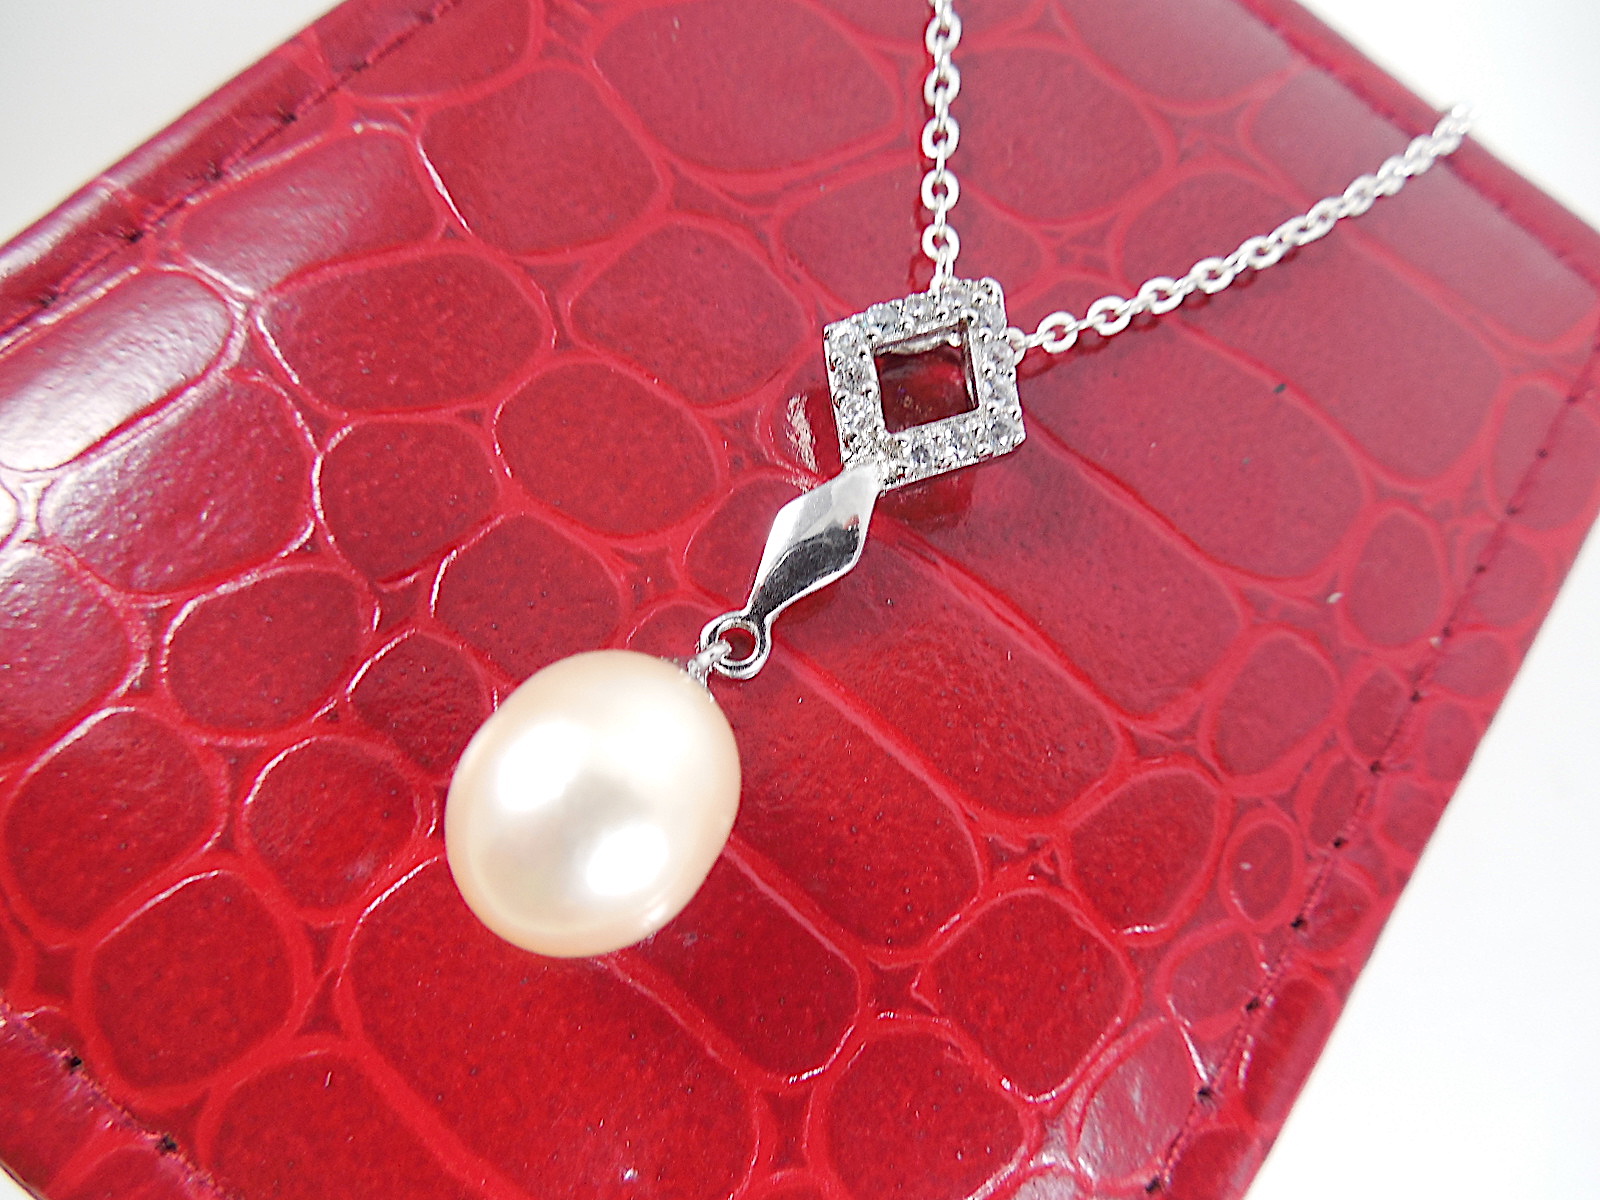 Silver necklace with Pearl pendant - Image 3 of 5